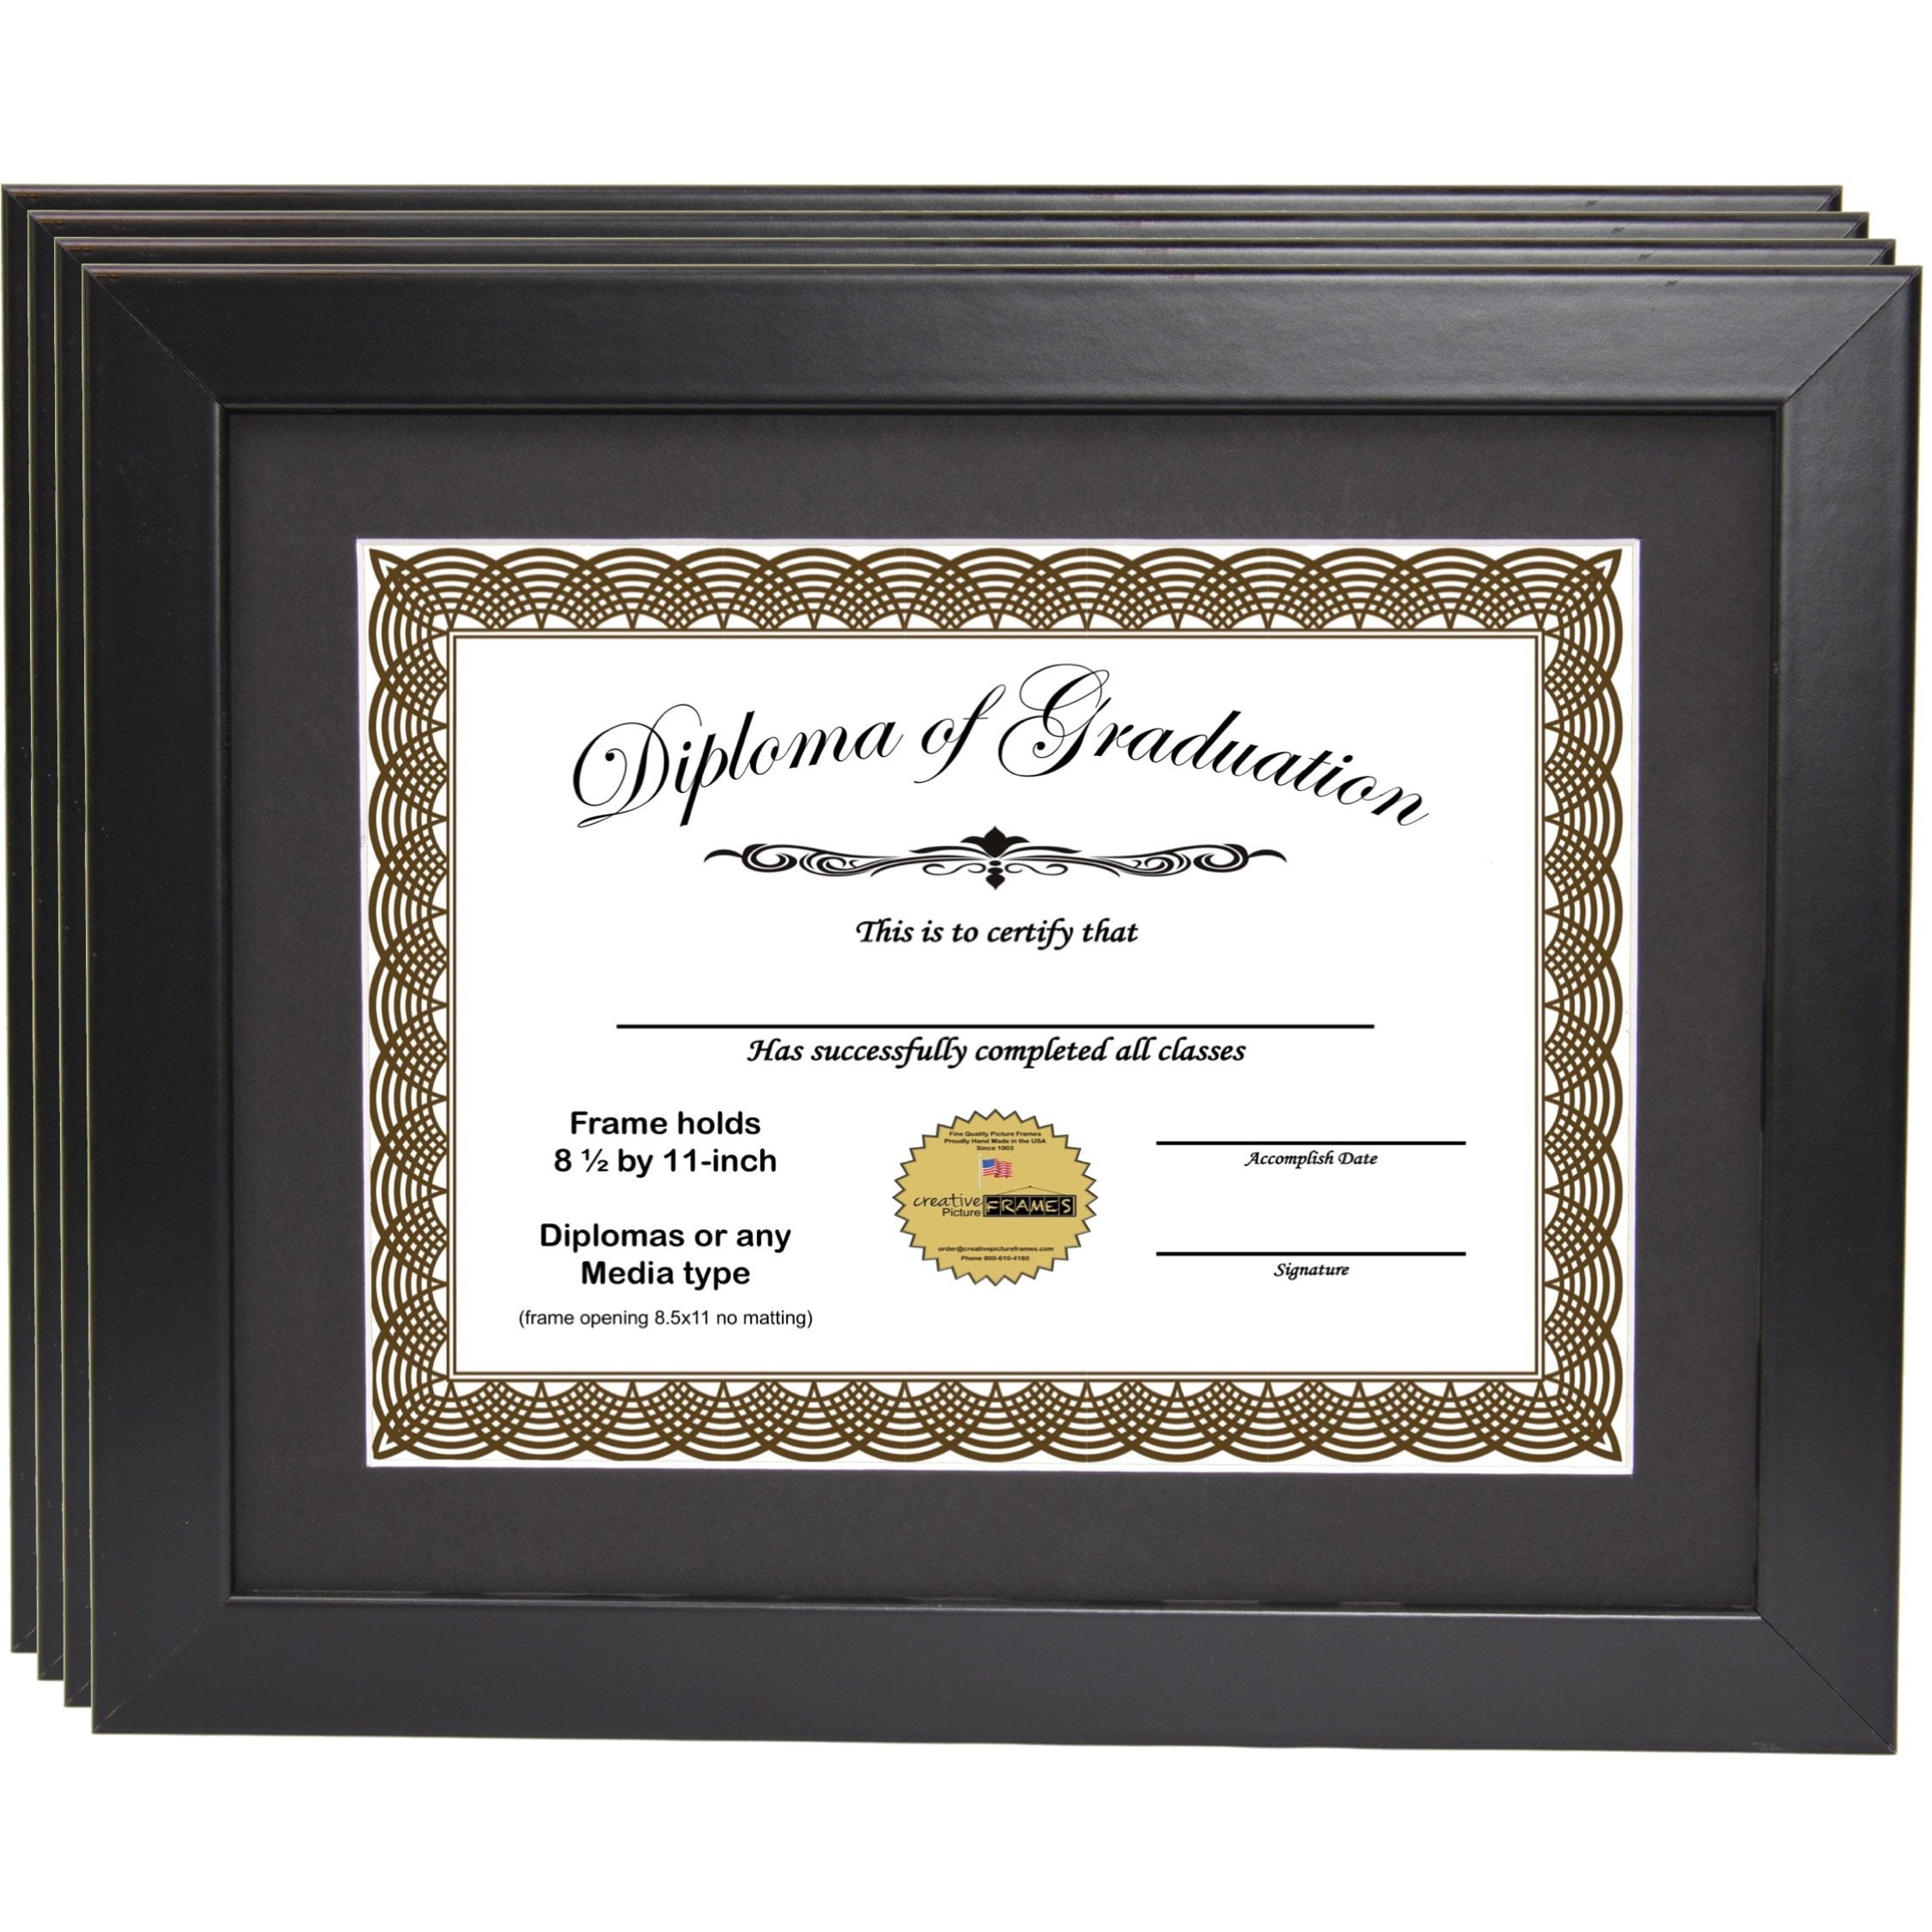 11x14 Black Solid Pine Wood Picture Photo Certificate Diploma Frame w/ White Mat 